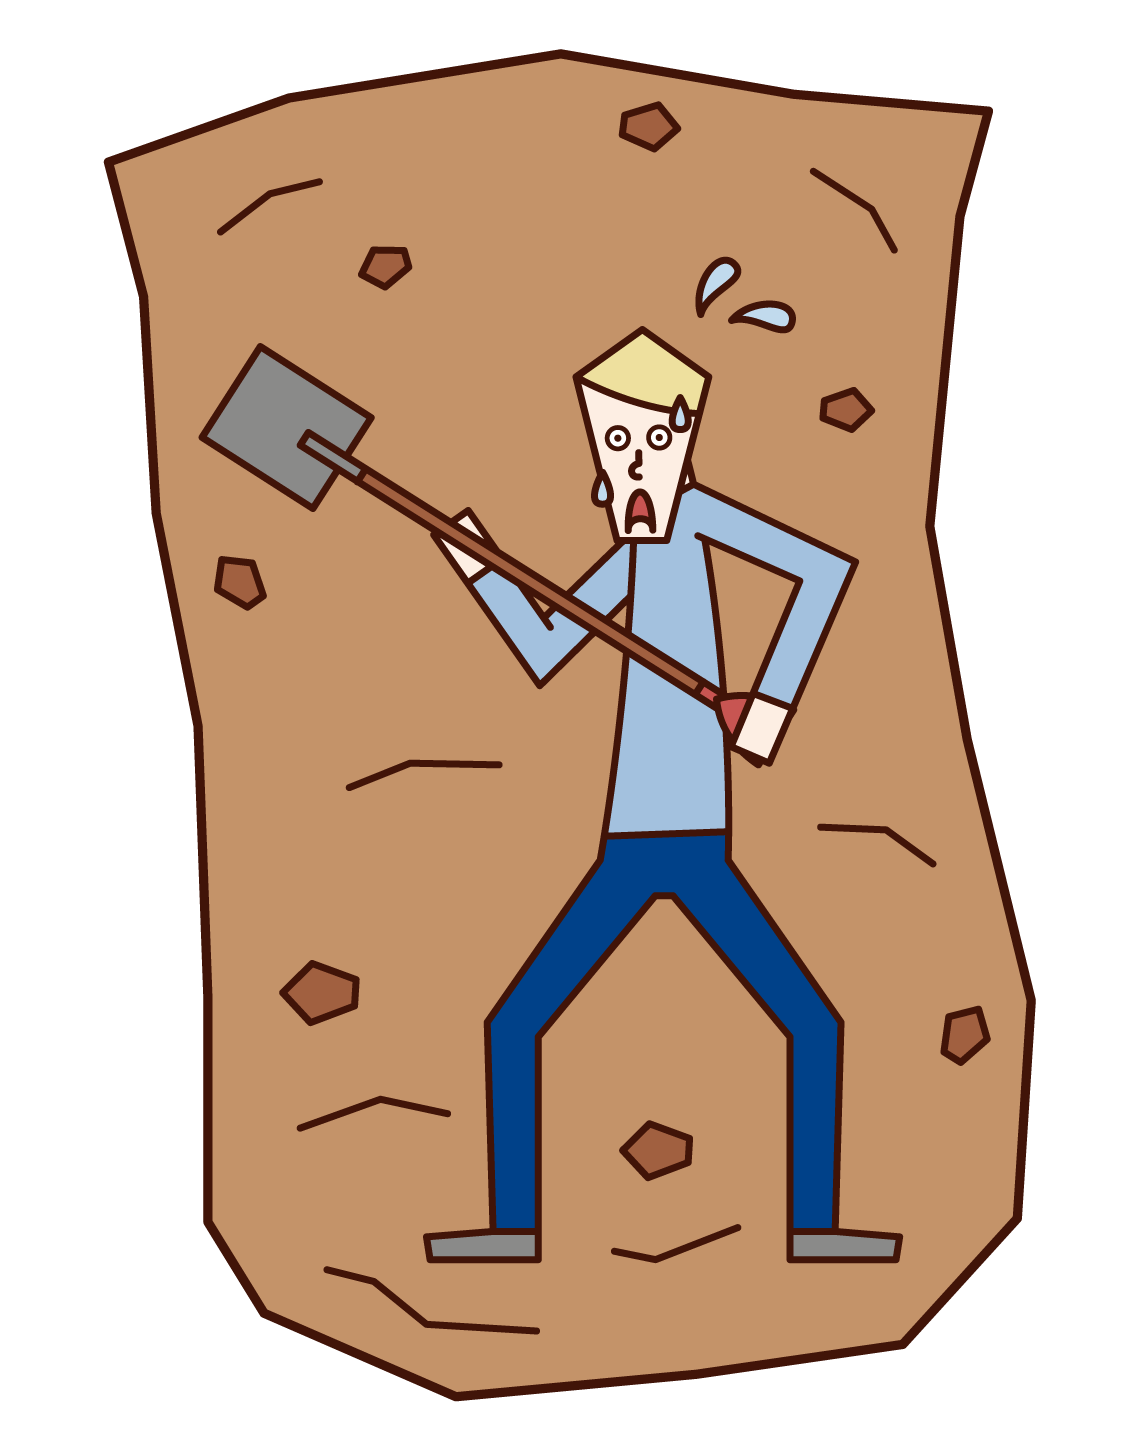 Illustration of a man digging a hole in search of a gold vein